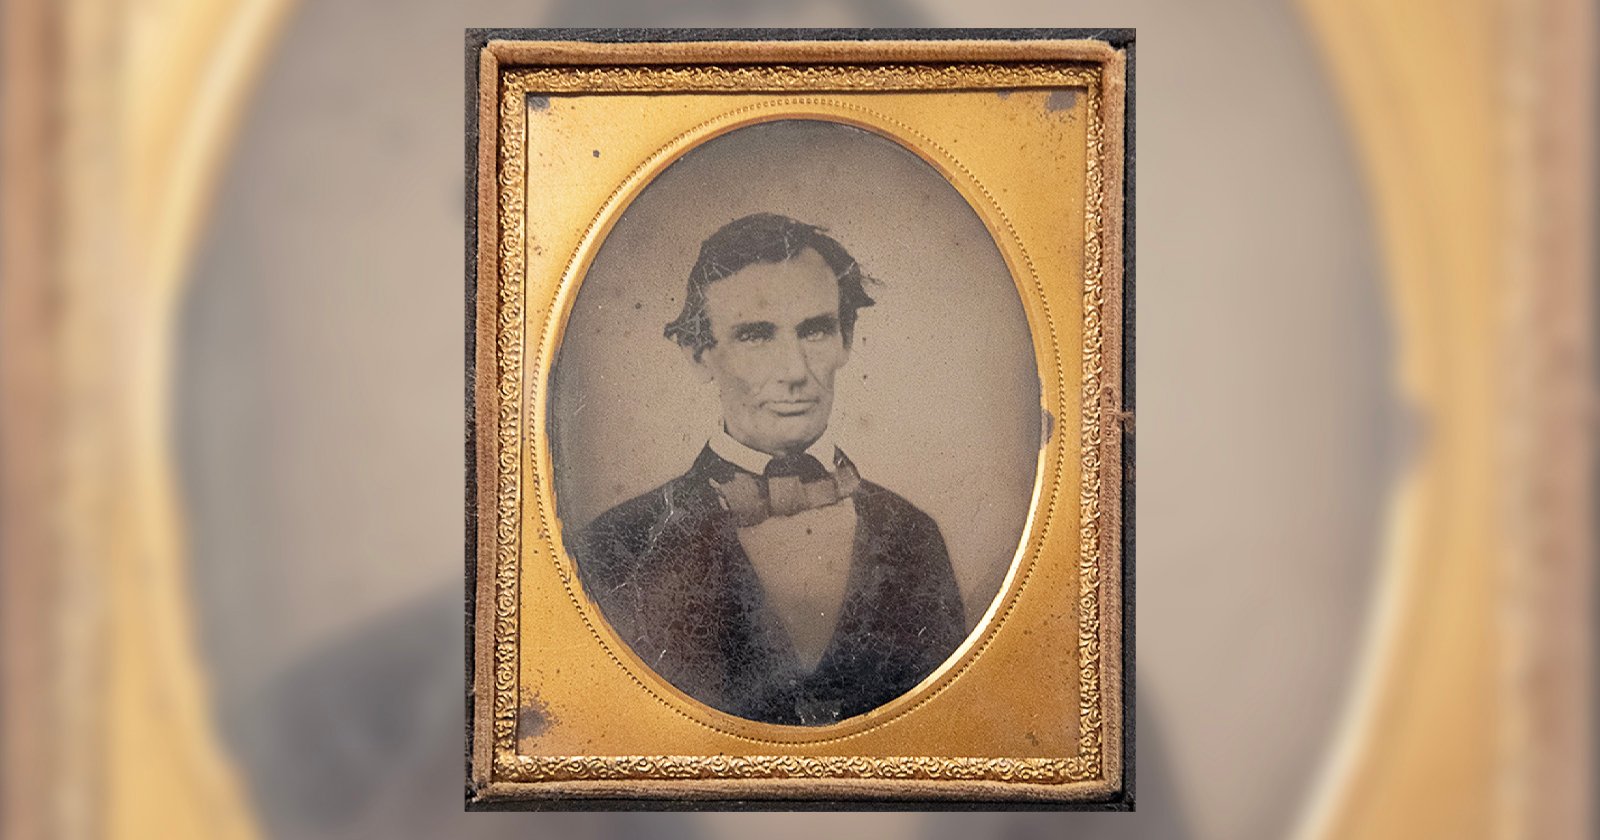  how 1858 abe lincoln portrait went from injured 